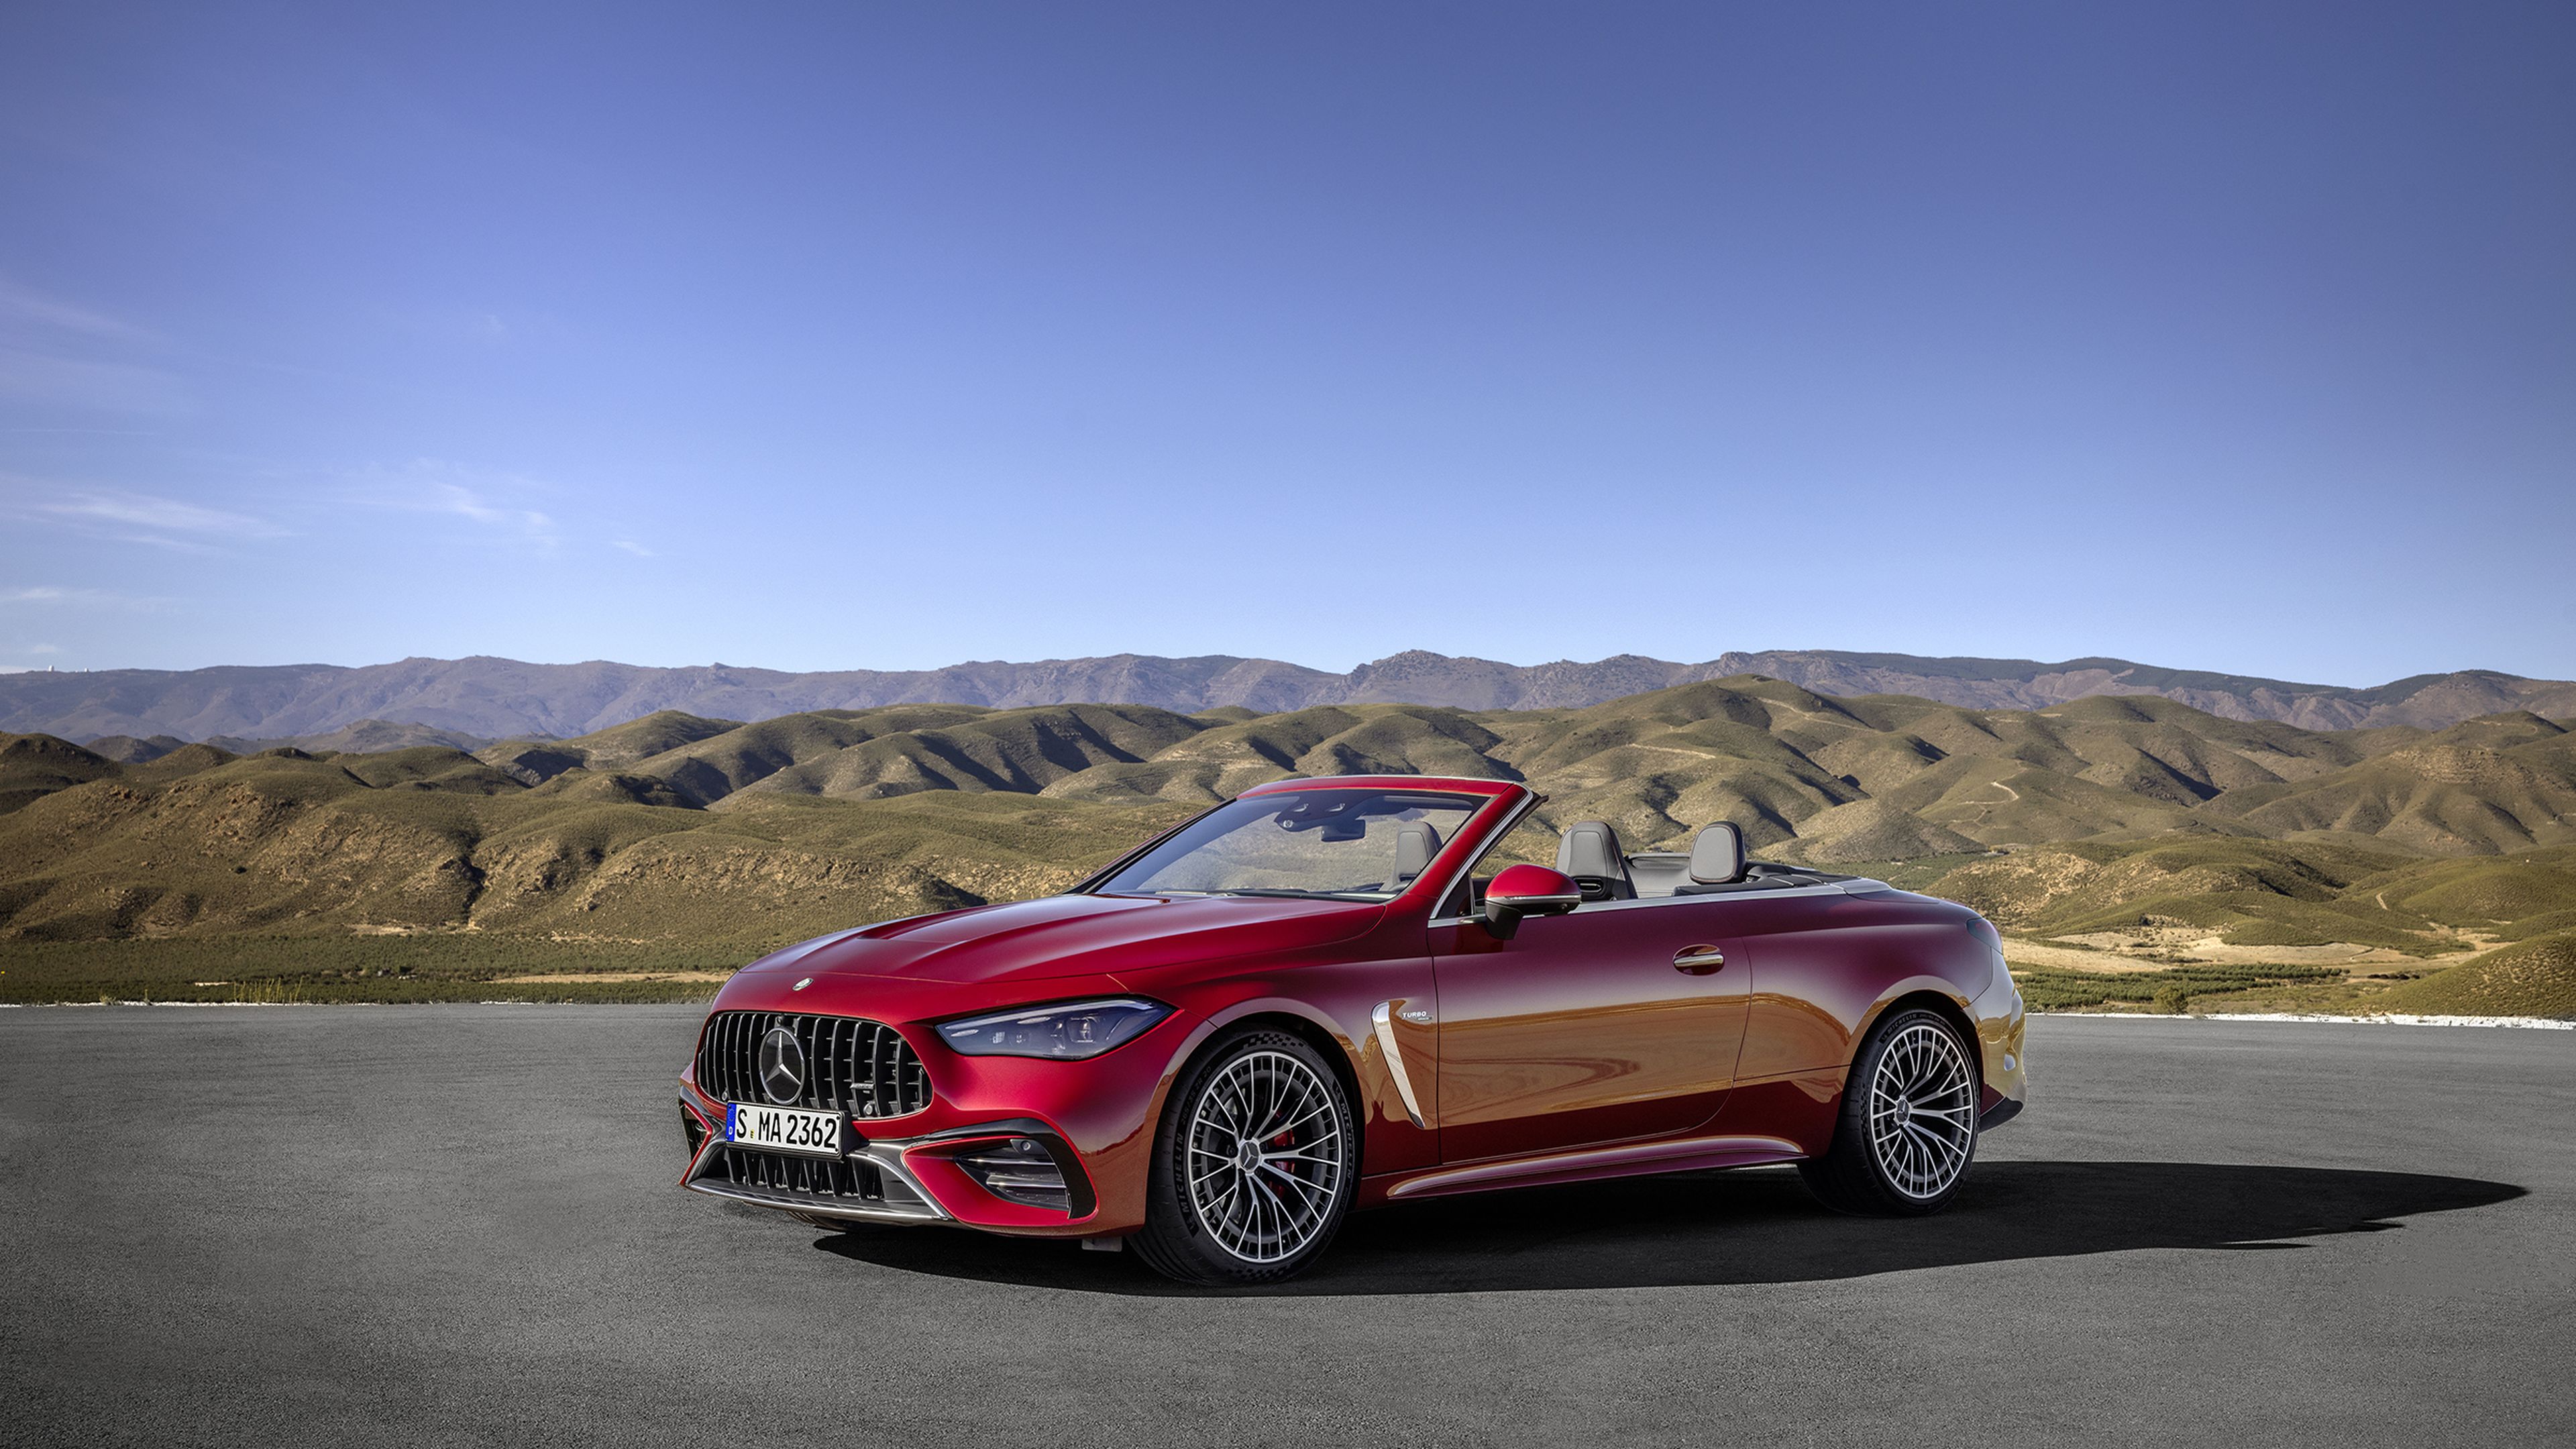  Mercedes CLE 53 4MATIC+ Cabriolet (1)